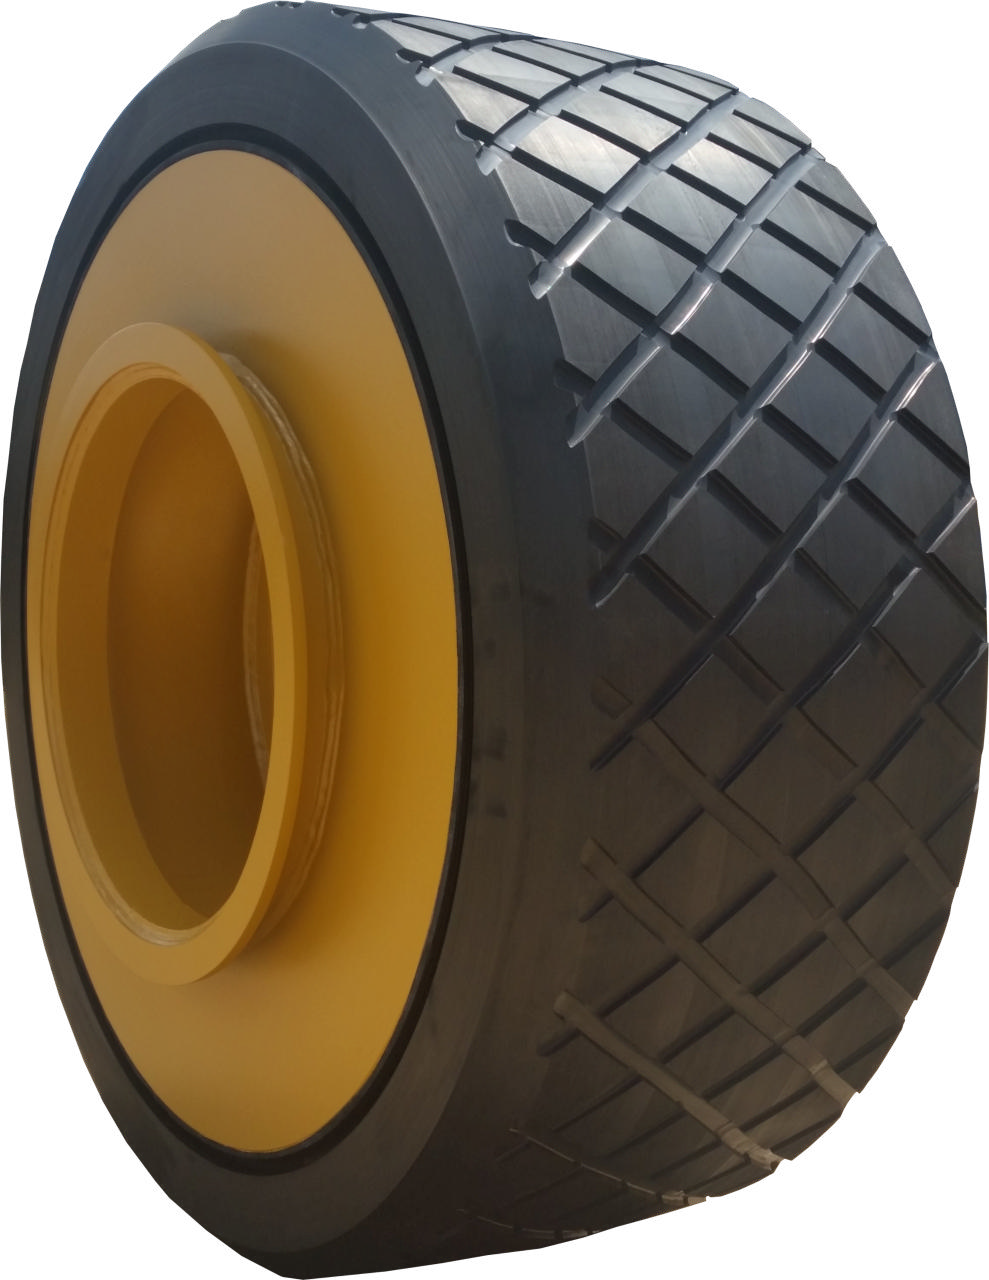 Example image for Caterpillar SH640D wheel, diamond tread, suits 14mm chains